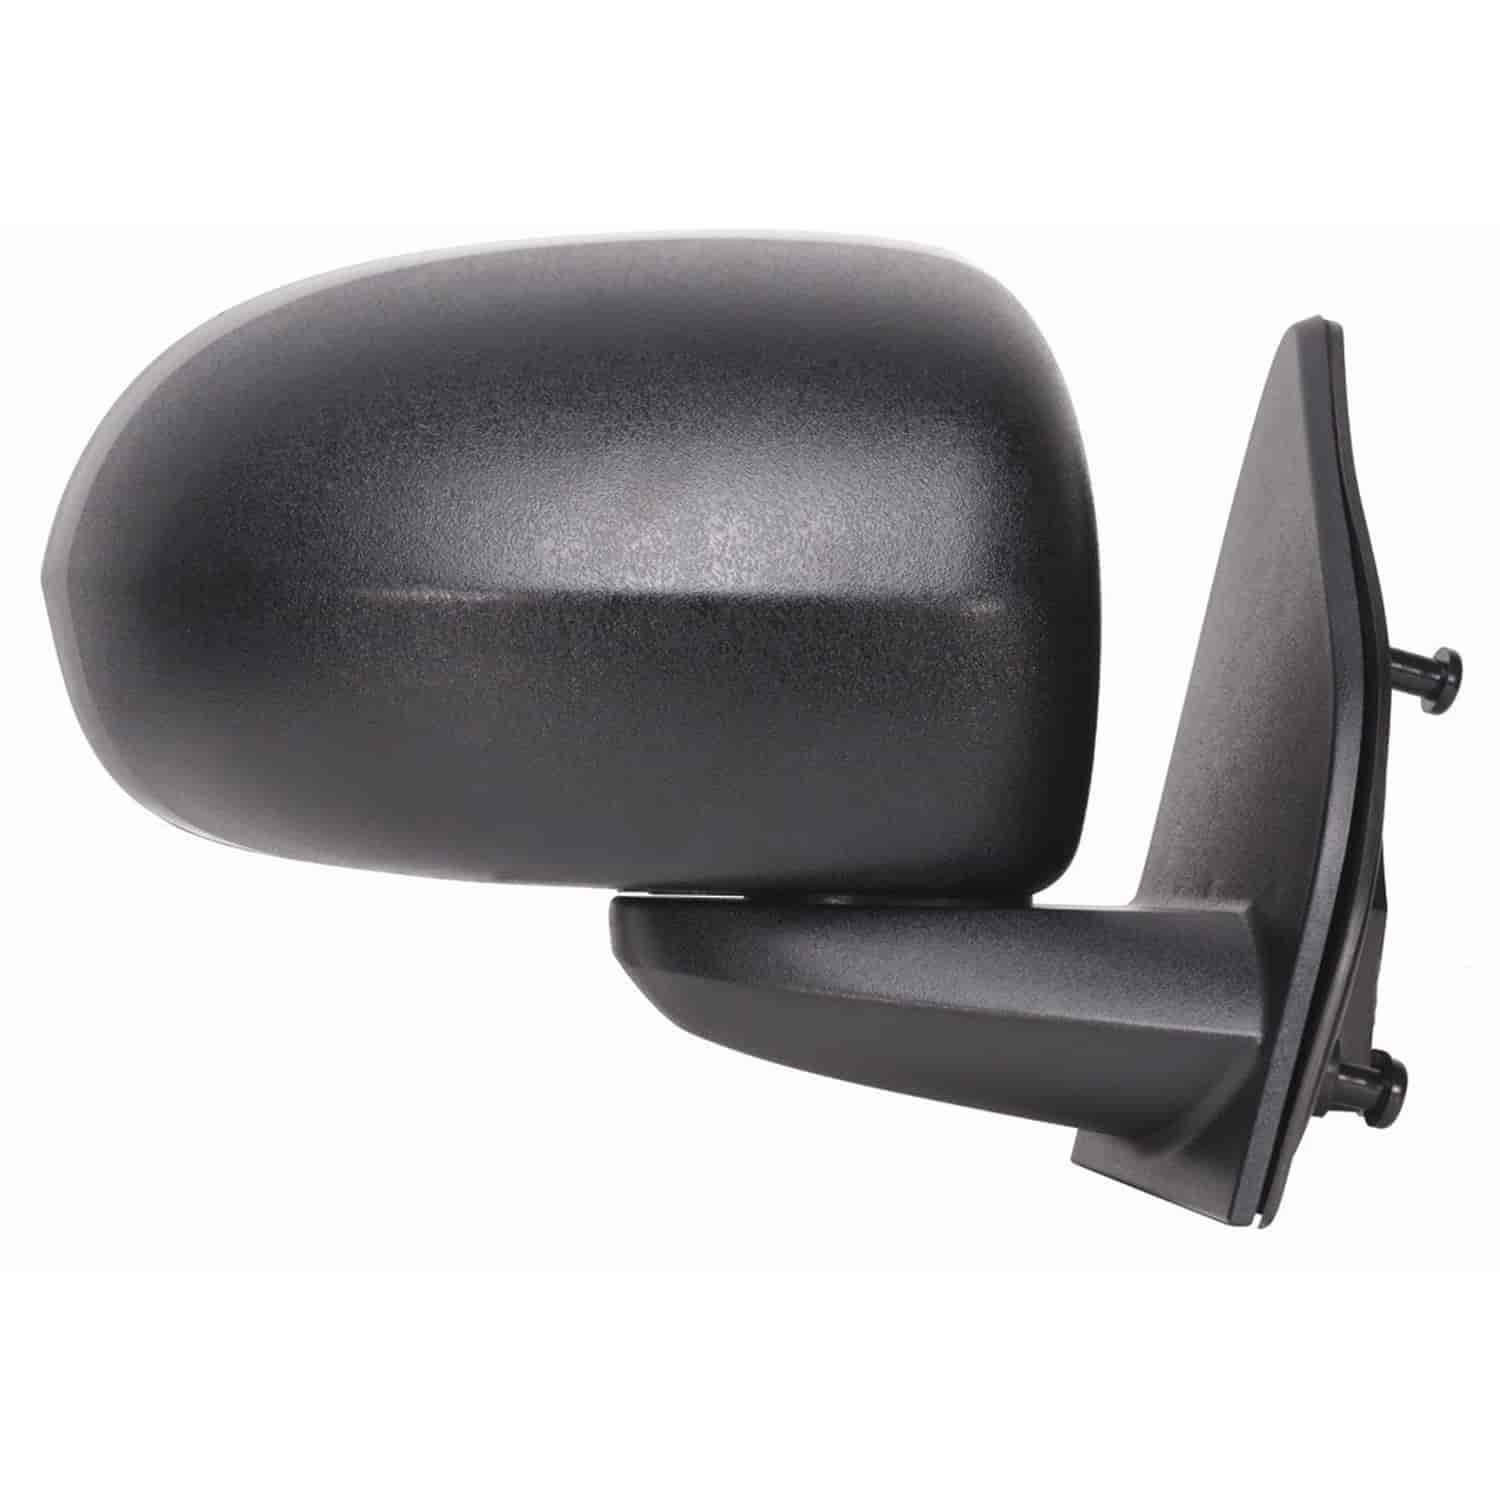 OEM Style Replacement mirror for 07-14 JEEP Compass passenger side mirror tested to fit and function